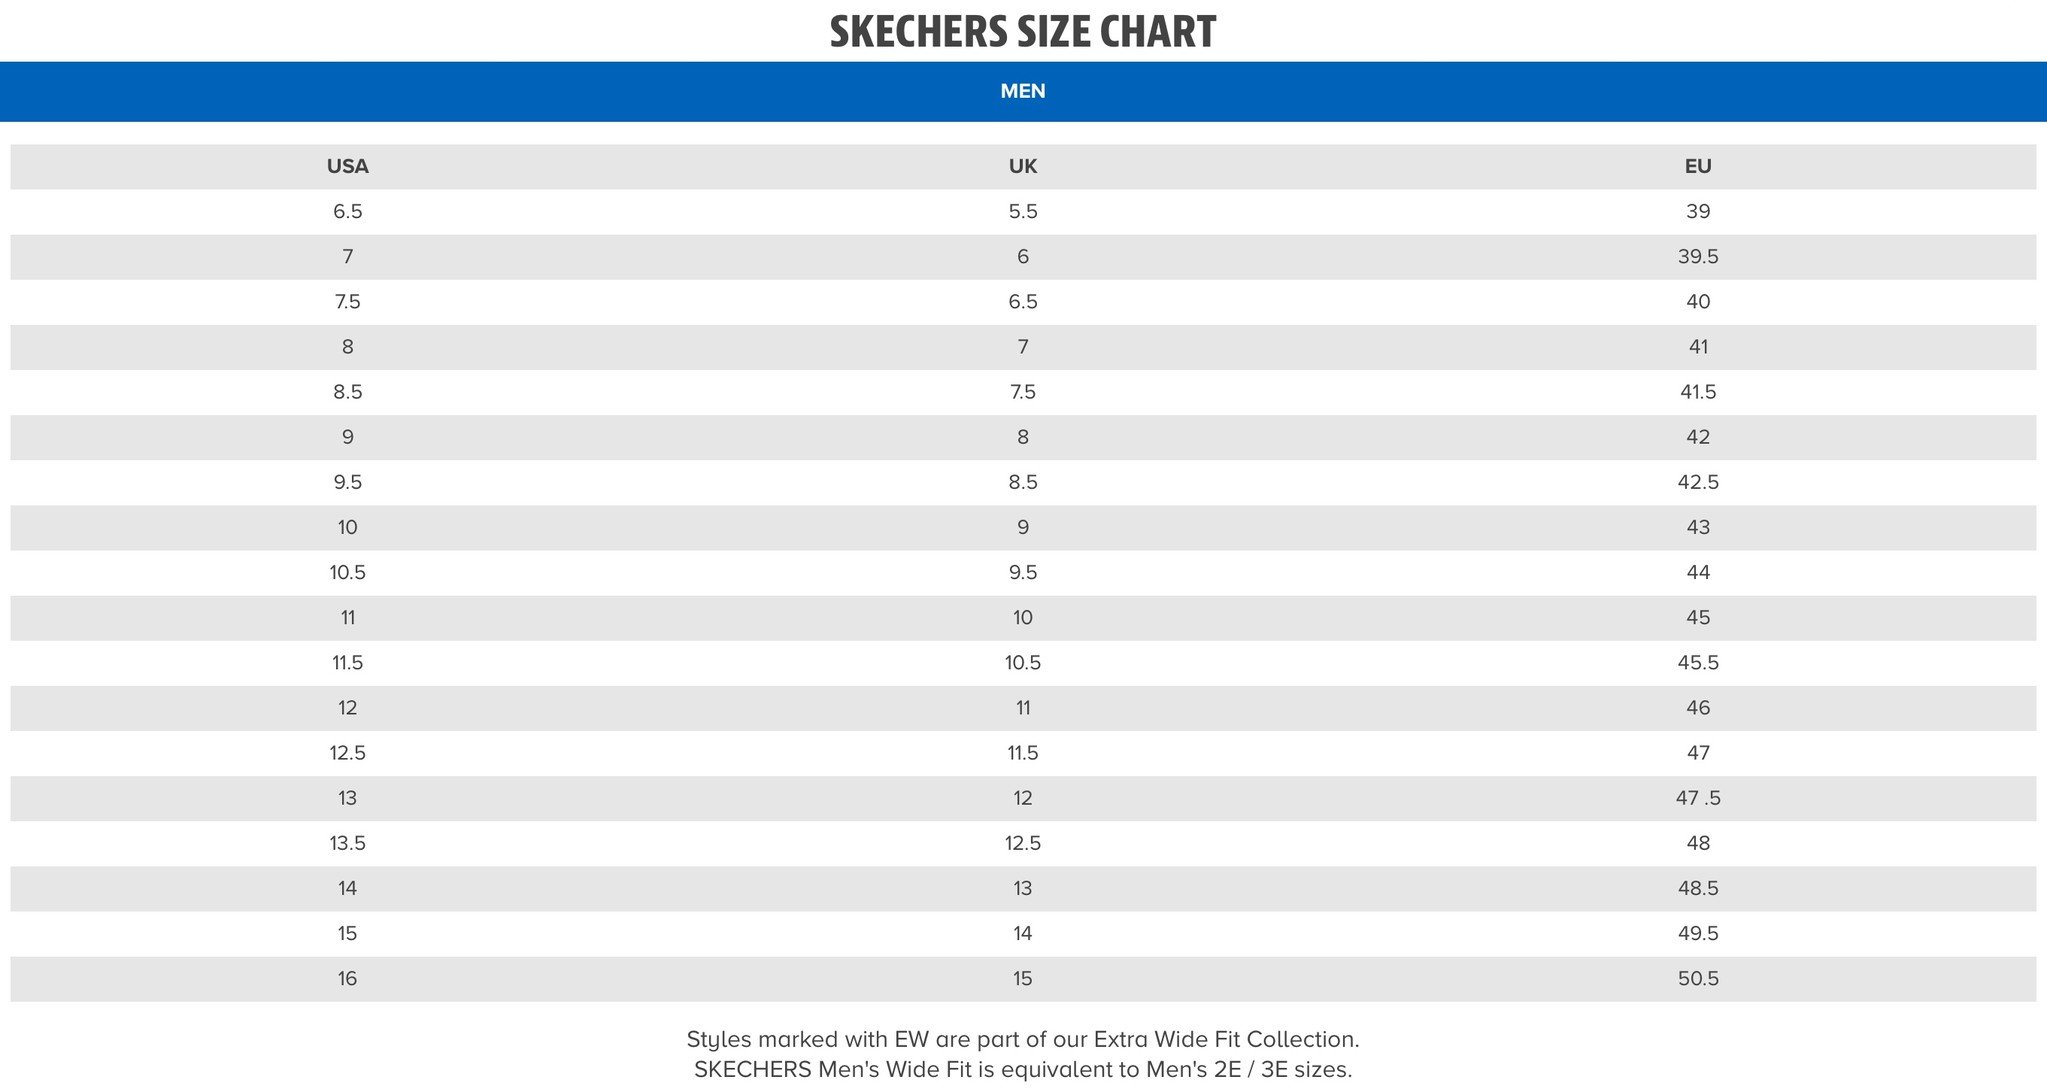 Skechers Shoe Size Chart In Inches